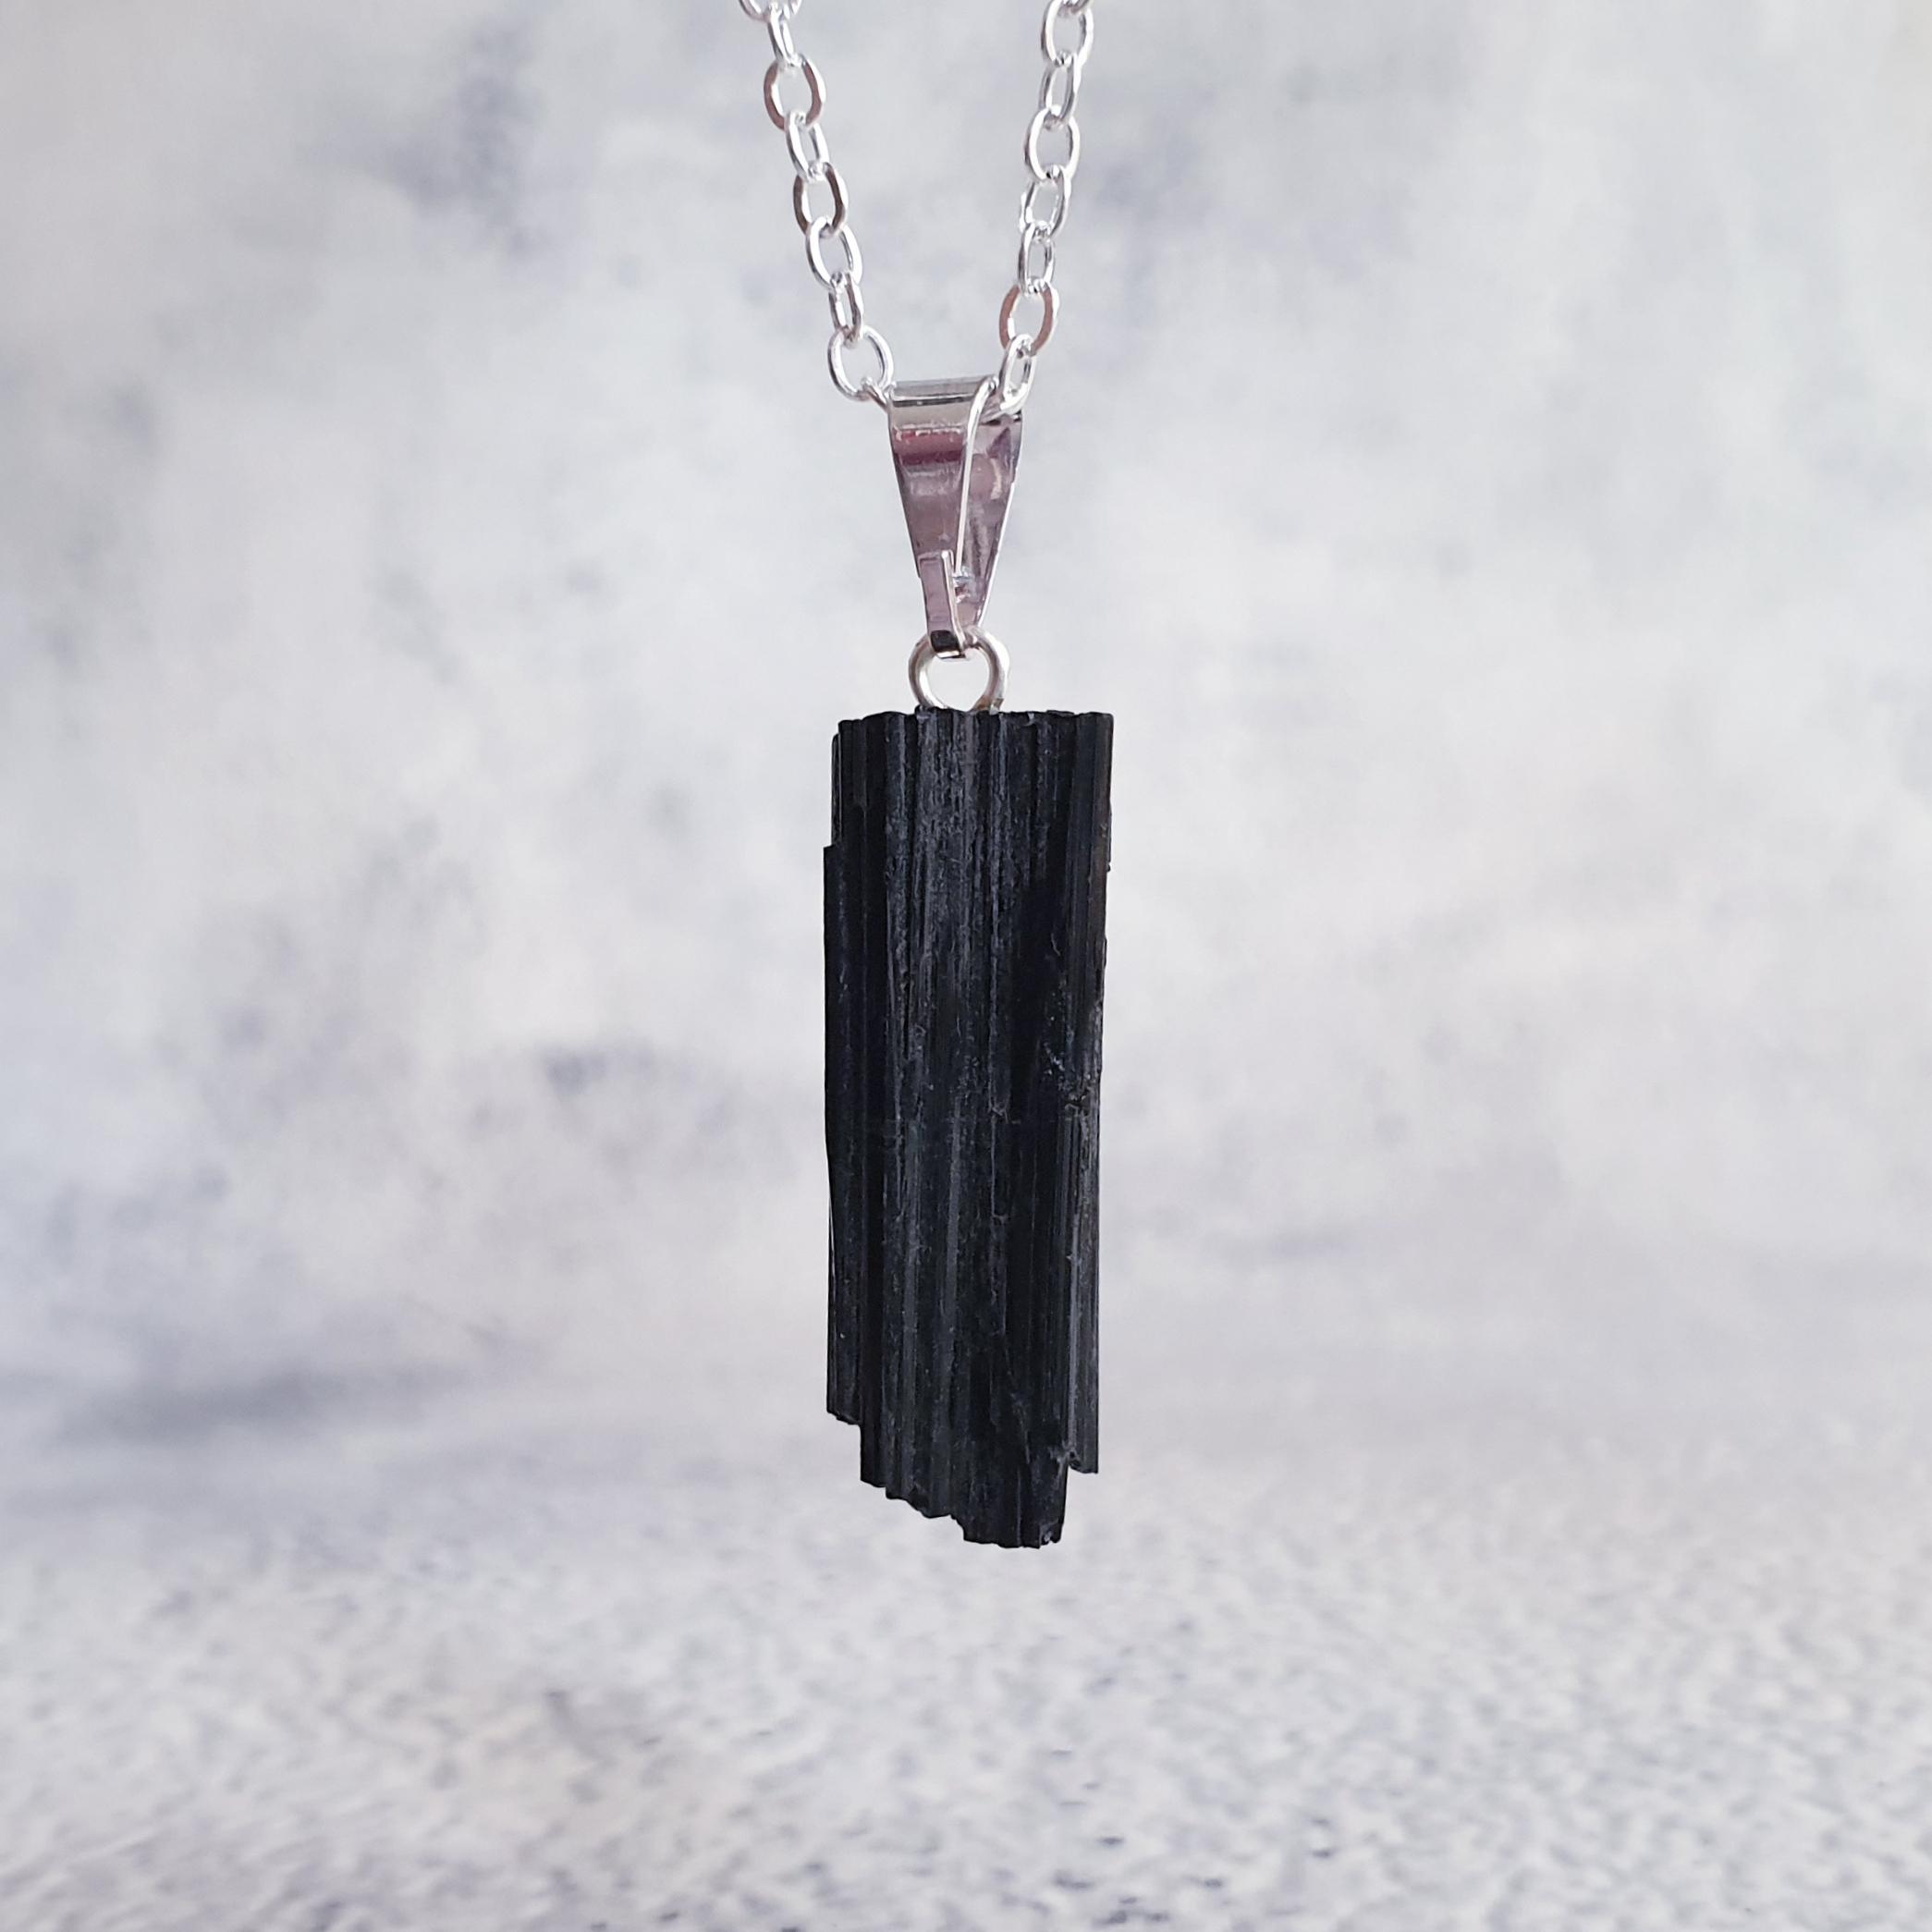 Black tourmaline crystal to help release self-imposed limitations at the Capricorn full moon